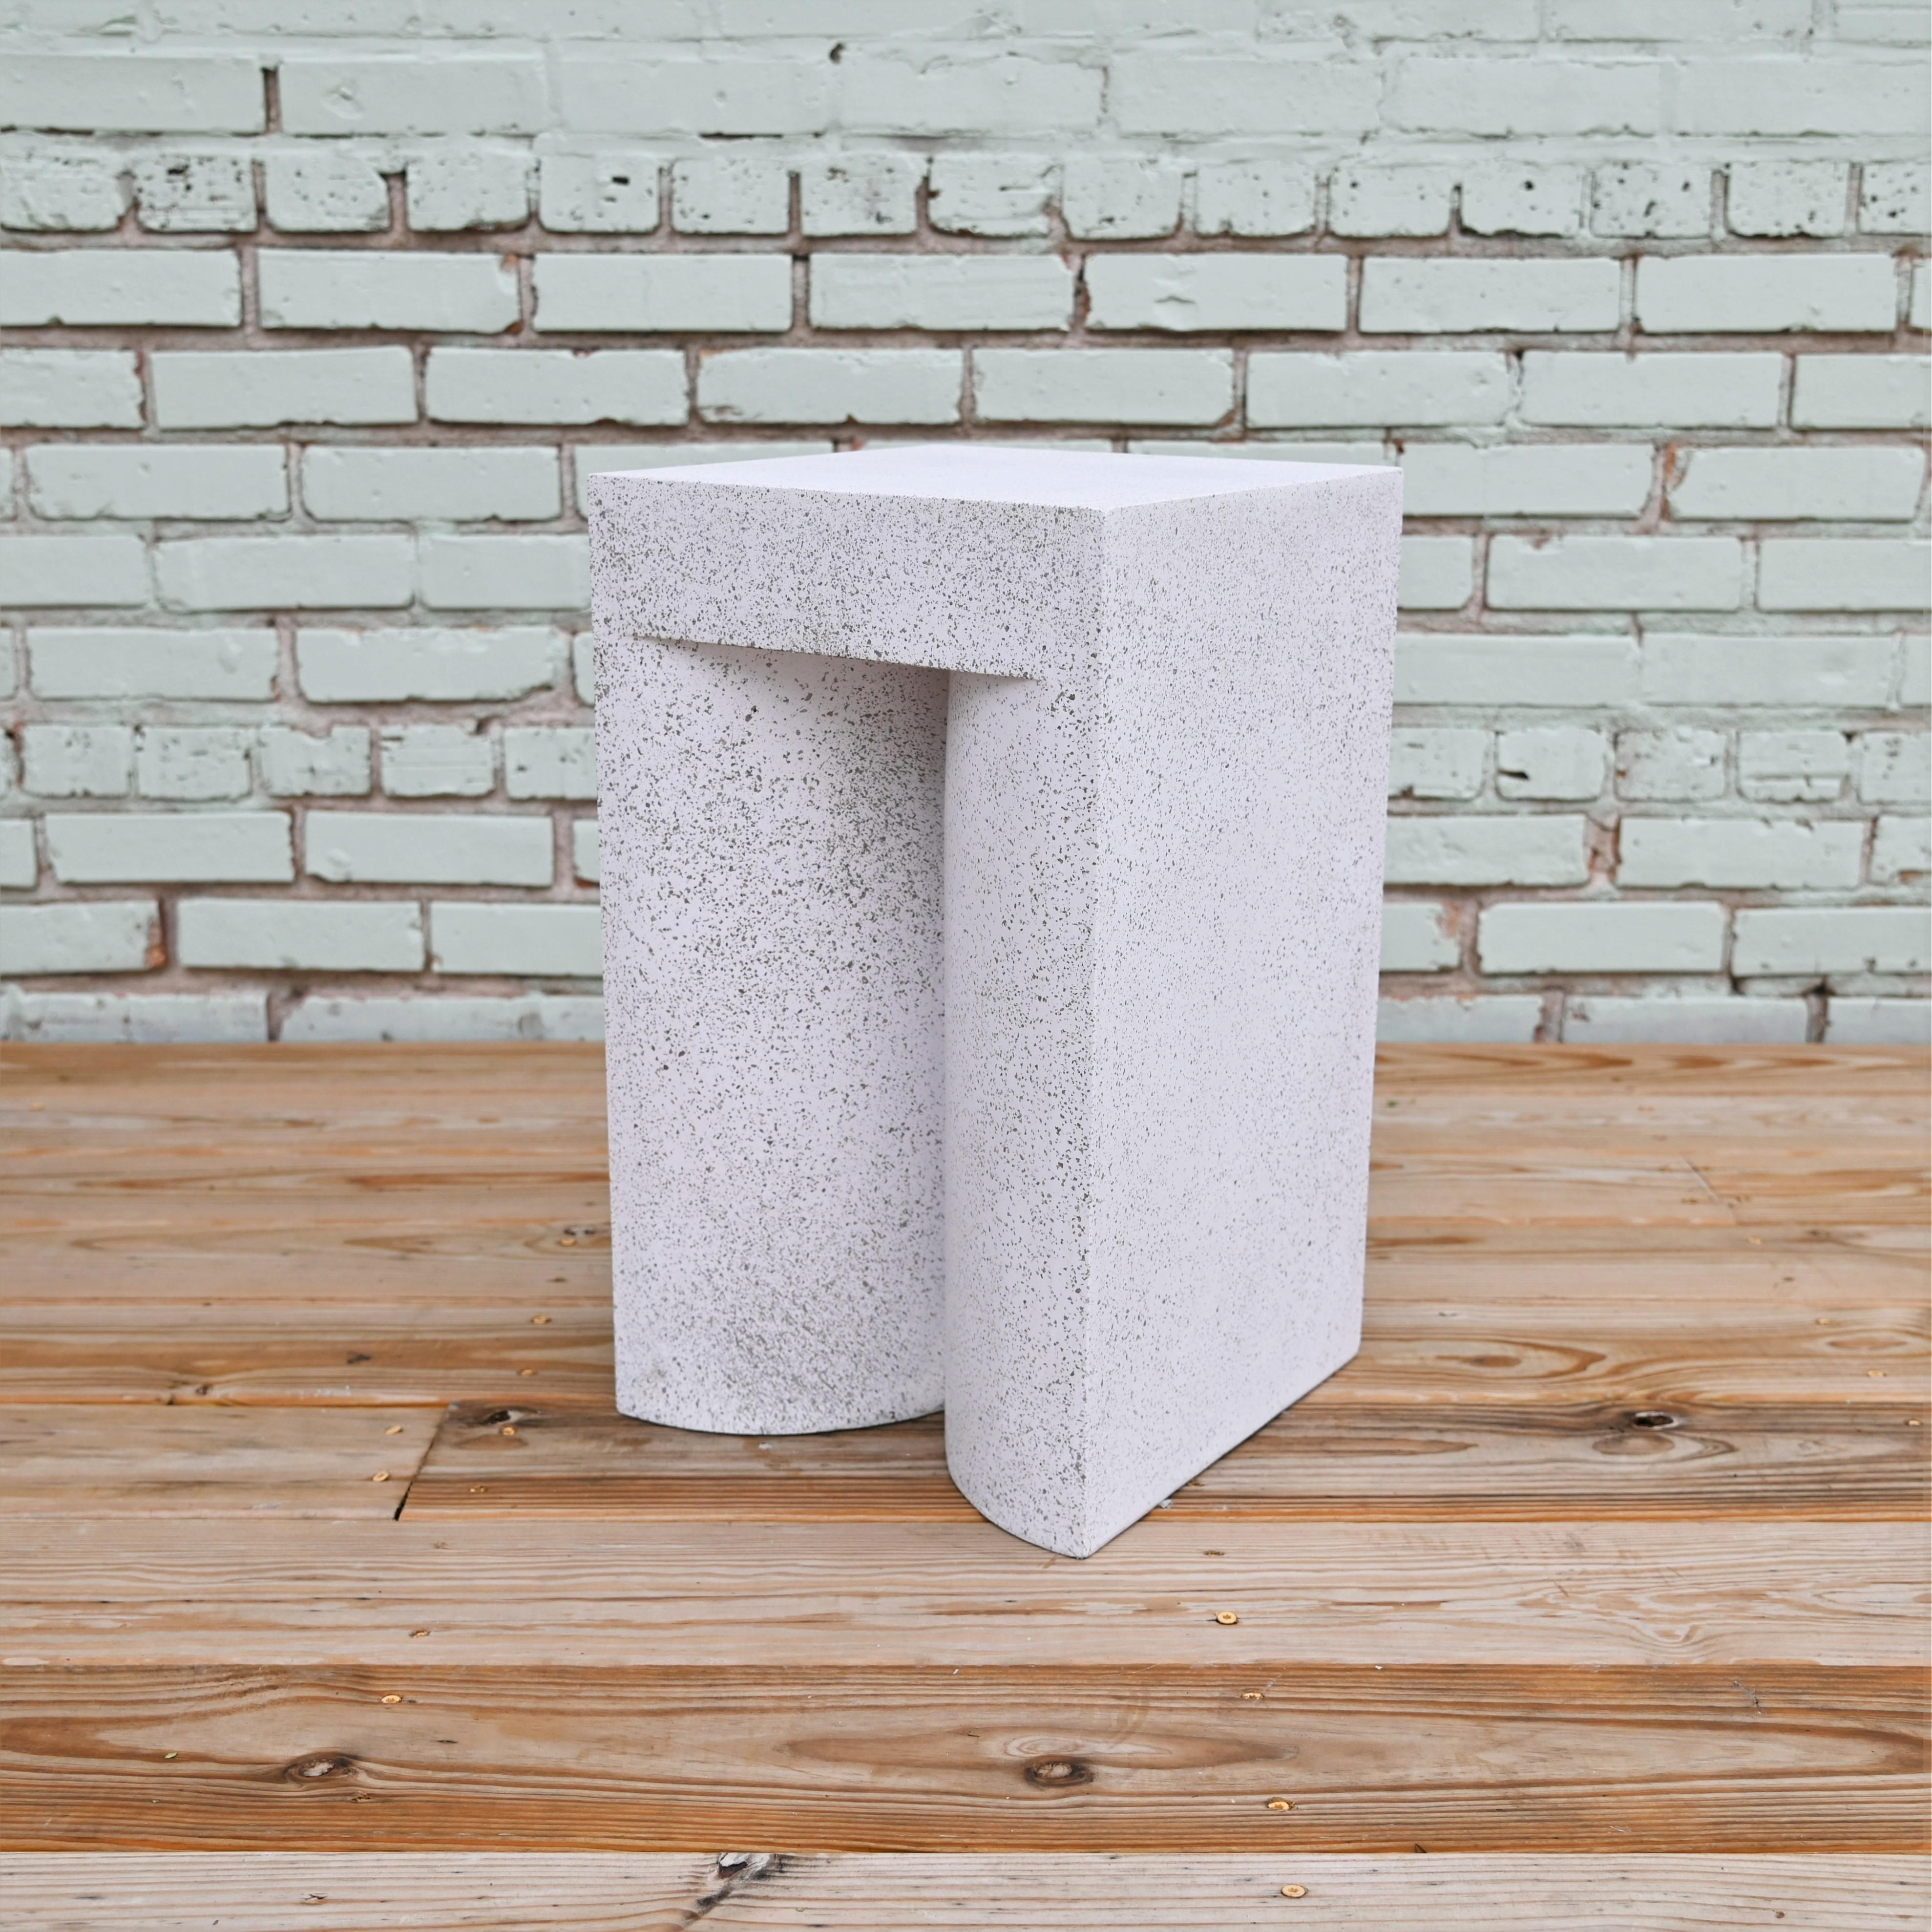 Dimensions: Width 12 in. (30 cm), depth 12 in. (30 cm), height 20 in. (51 cm). Weight 15 lbs. (7 kg).

Finish color options:
White stone
Natural stone (shown)
Aged stone
Keystone
Coal stone

Materials: resin, stone aggregate and